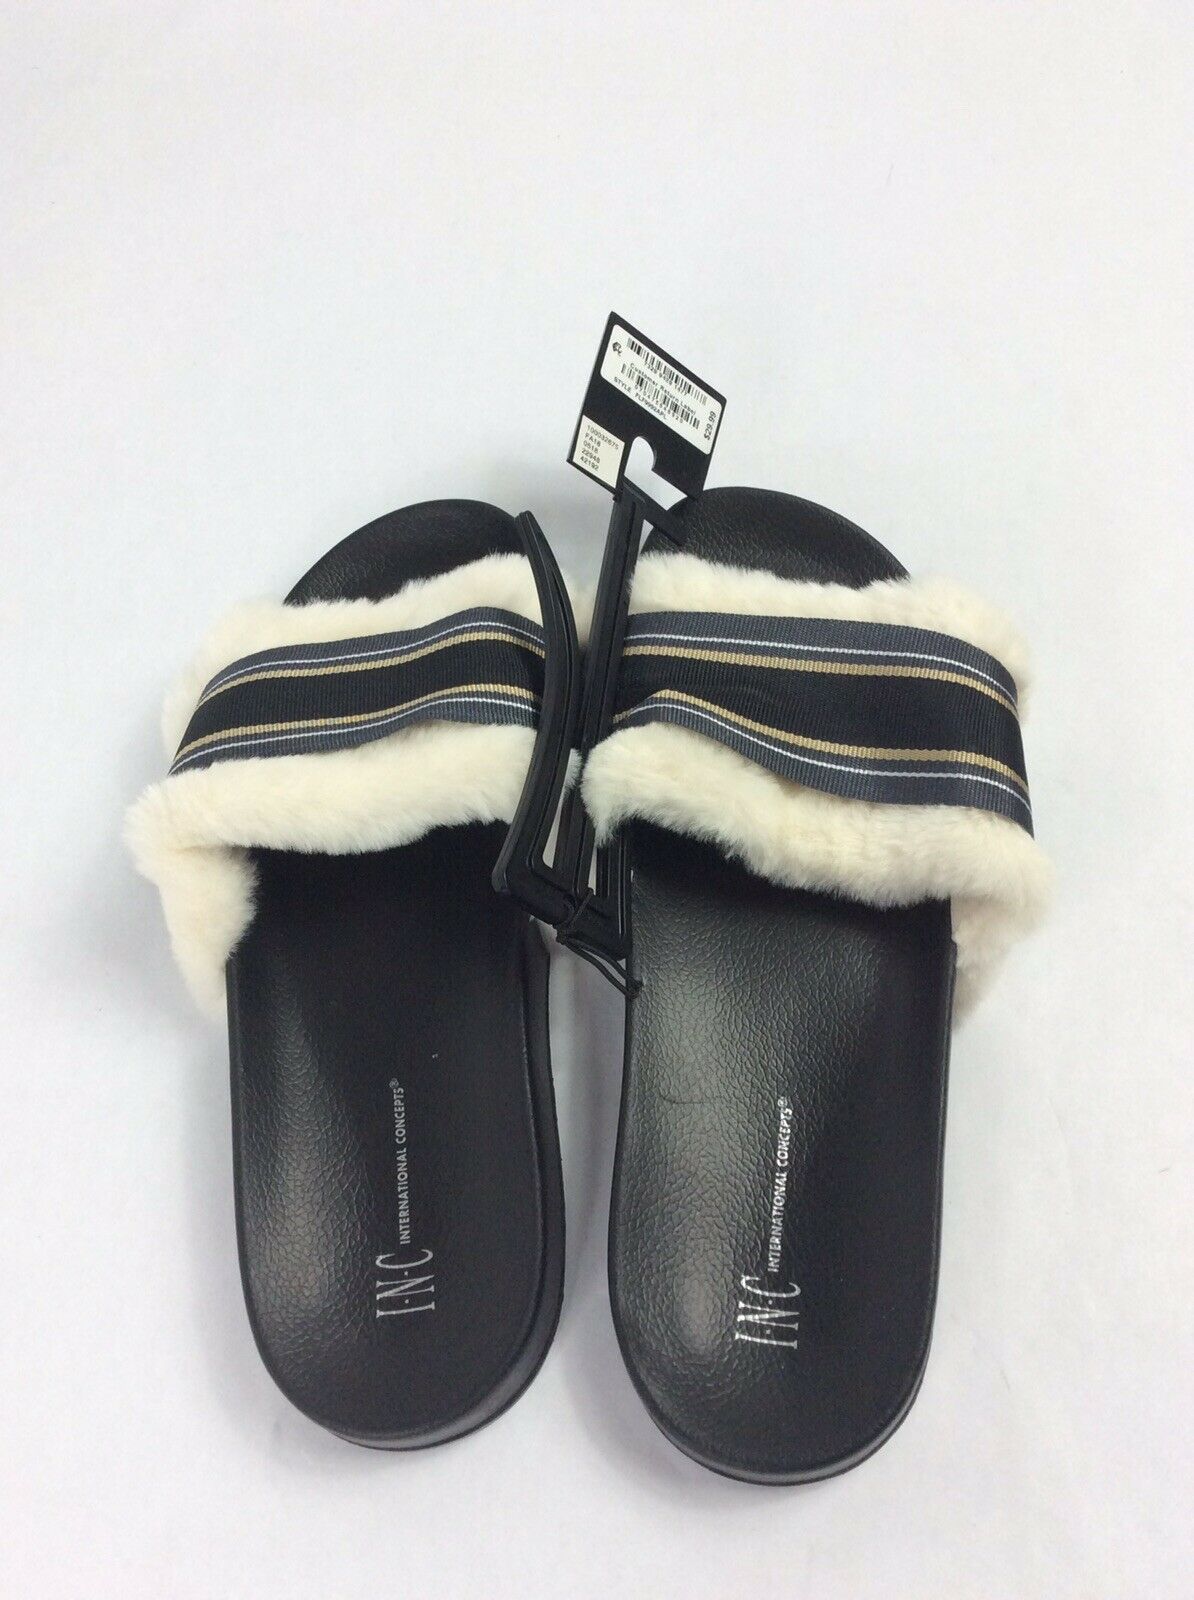 INC Slippers XL $29.99 - Outlet Designers